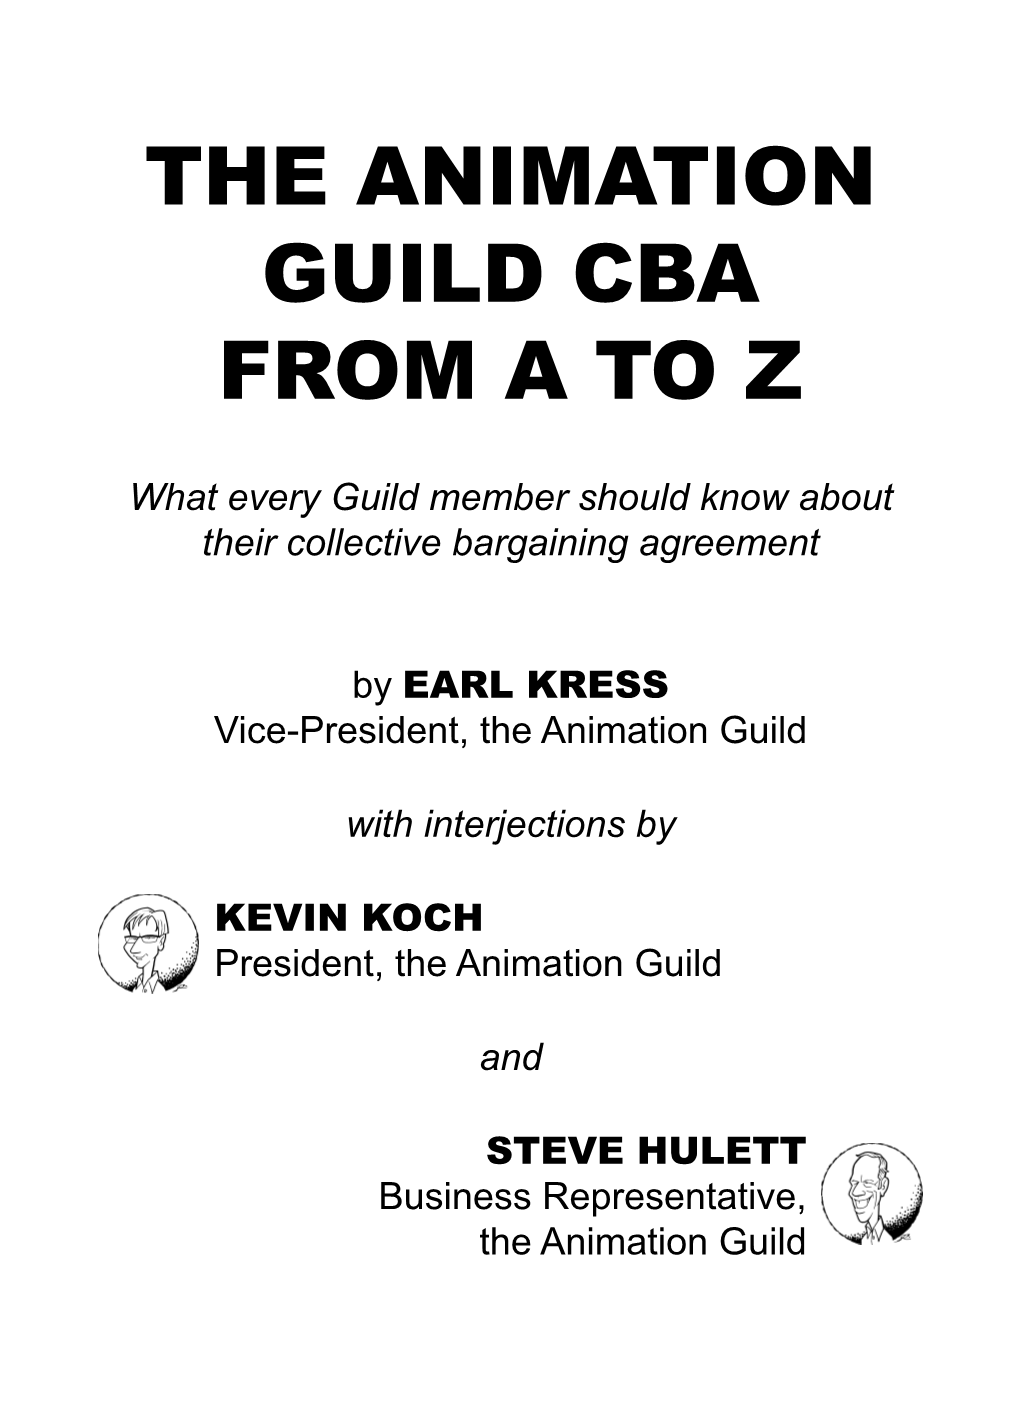 The Animation Guild Cba from a to Z